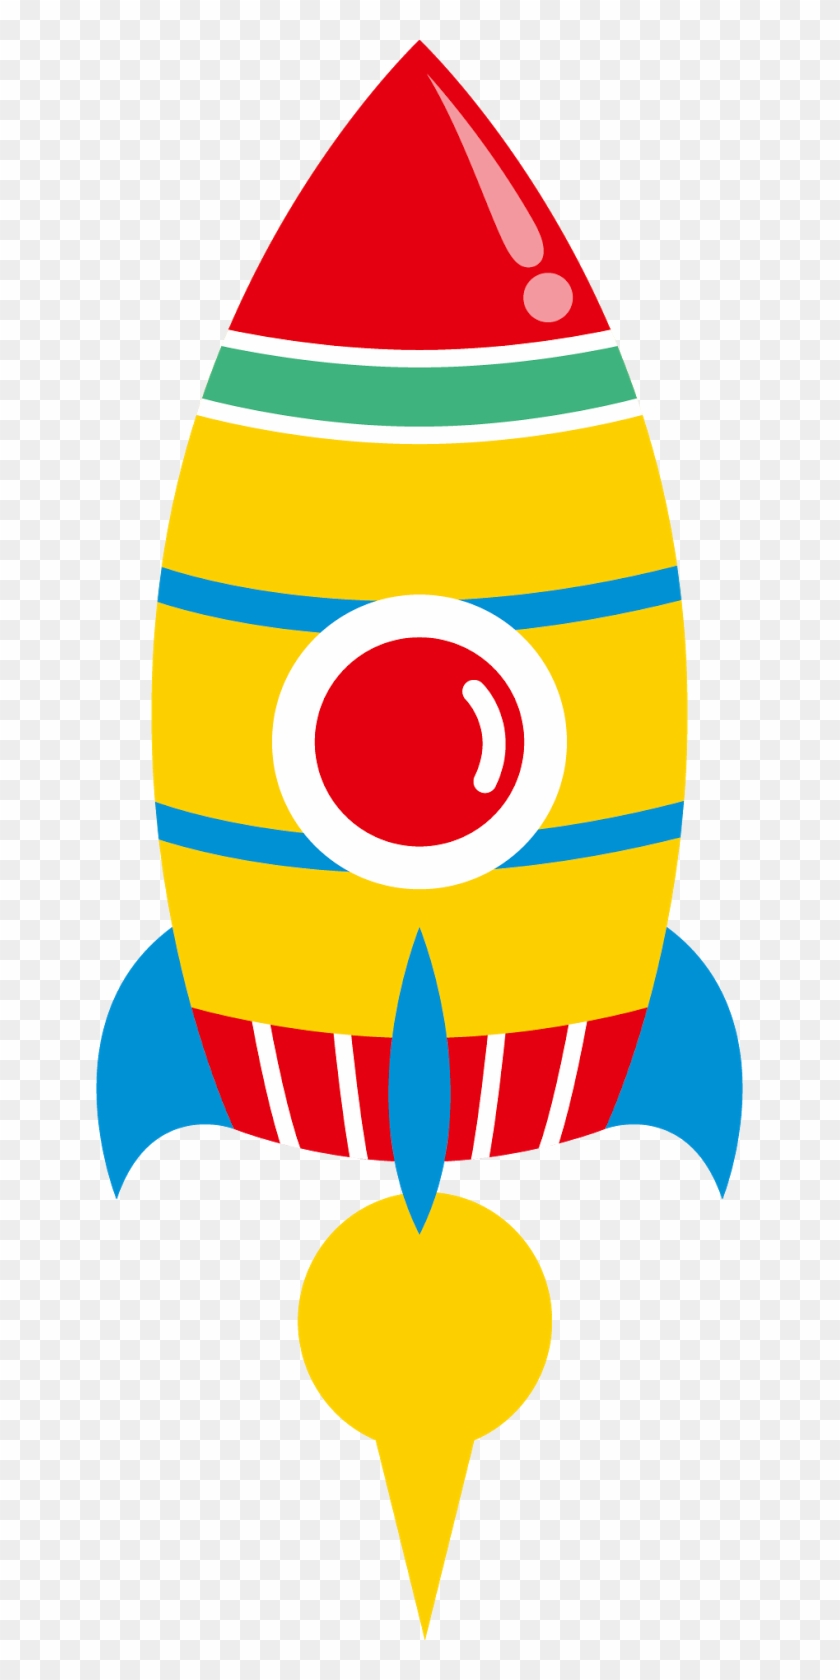 Giggle And Print - Free Clip Art Space Ship #171679